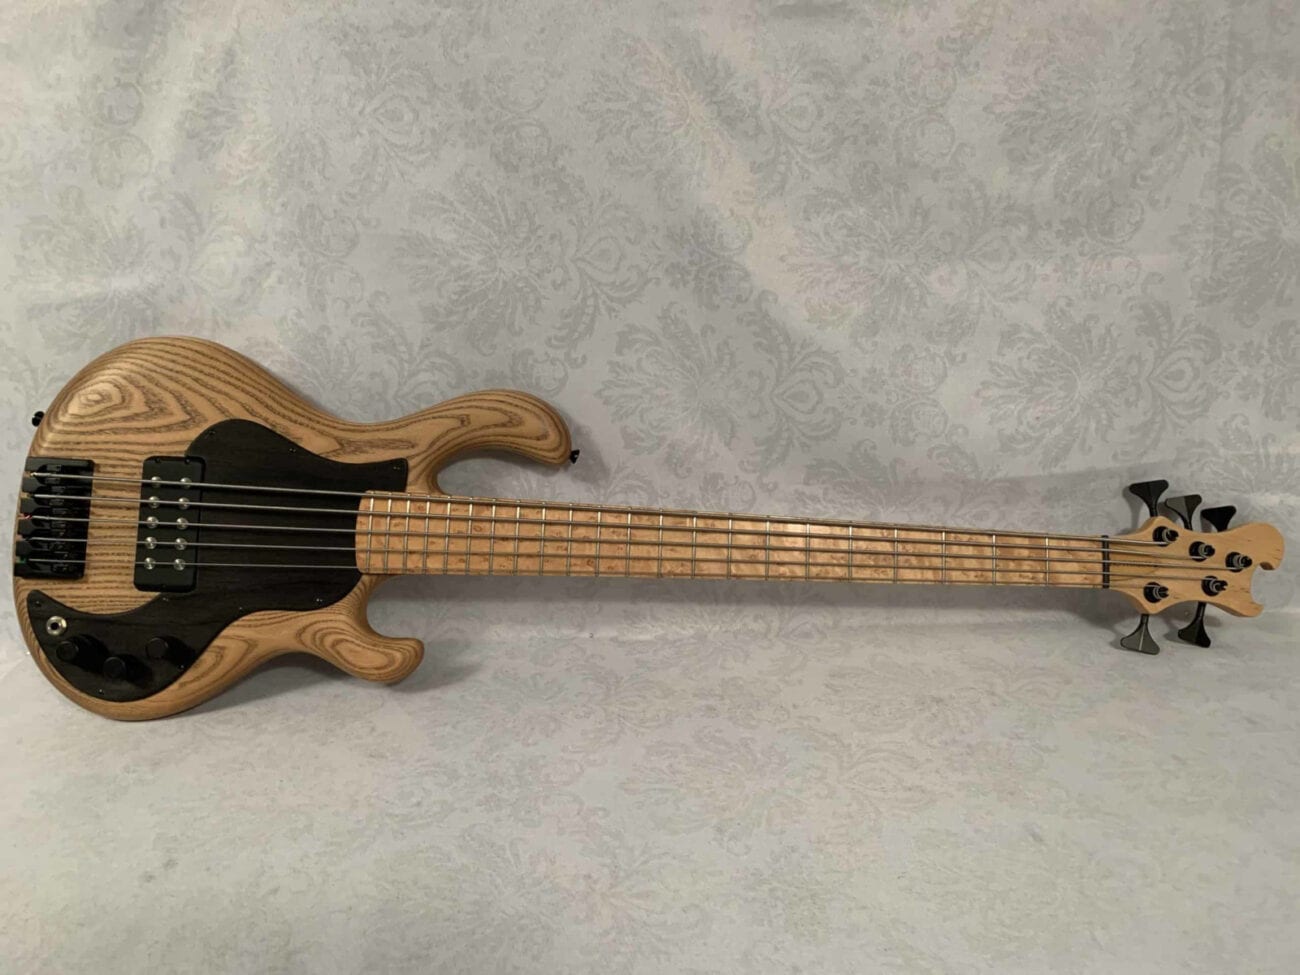 Are you on the prowl for that perfect bass guitar? Here are some tips and tricks to pick out the perfect instrument, no matter what you're into.